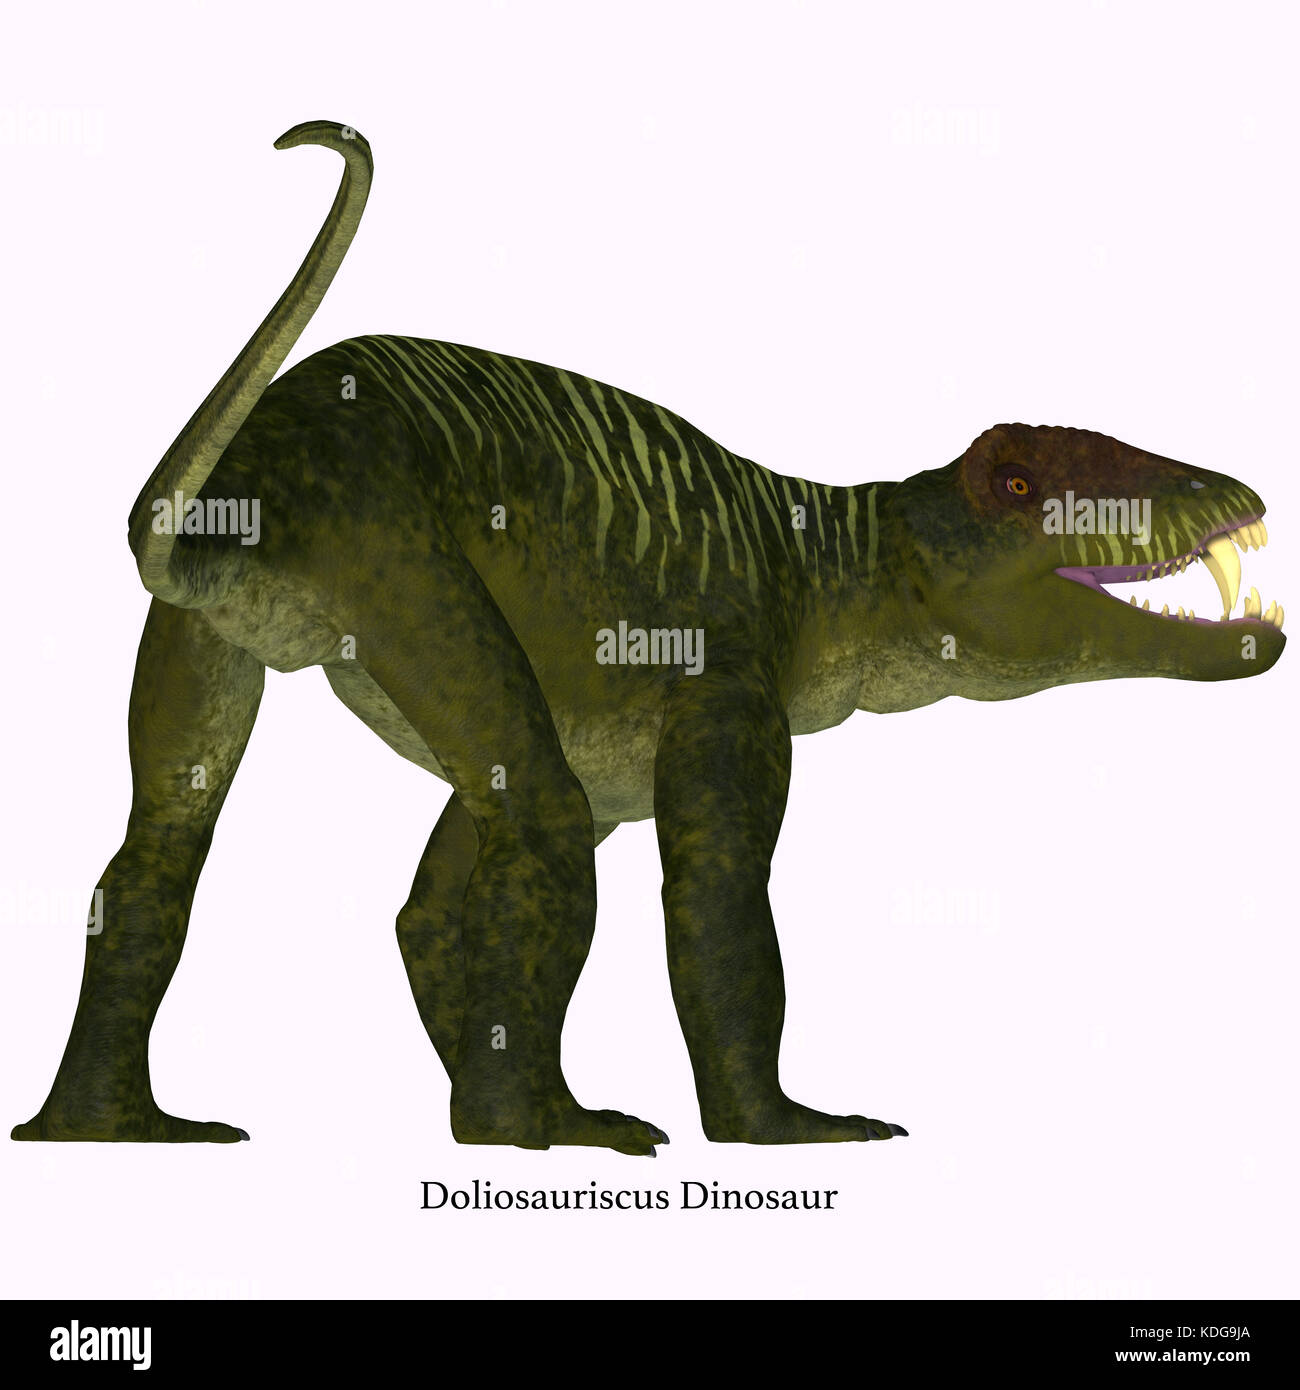 Doliosauriscus Dinosaur Tail - Doliosauriscus is an extinct genus of therapsid carnivorous dinosaur that lived in Russia in the Permian Period. Stock Photo